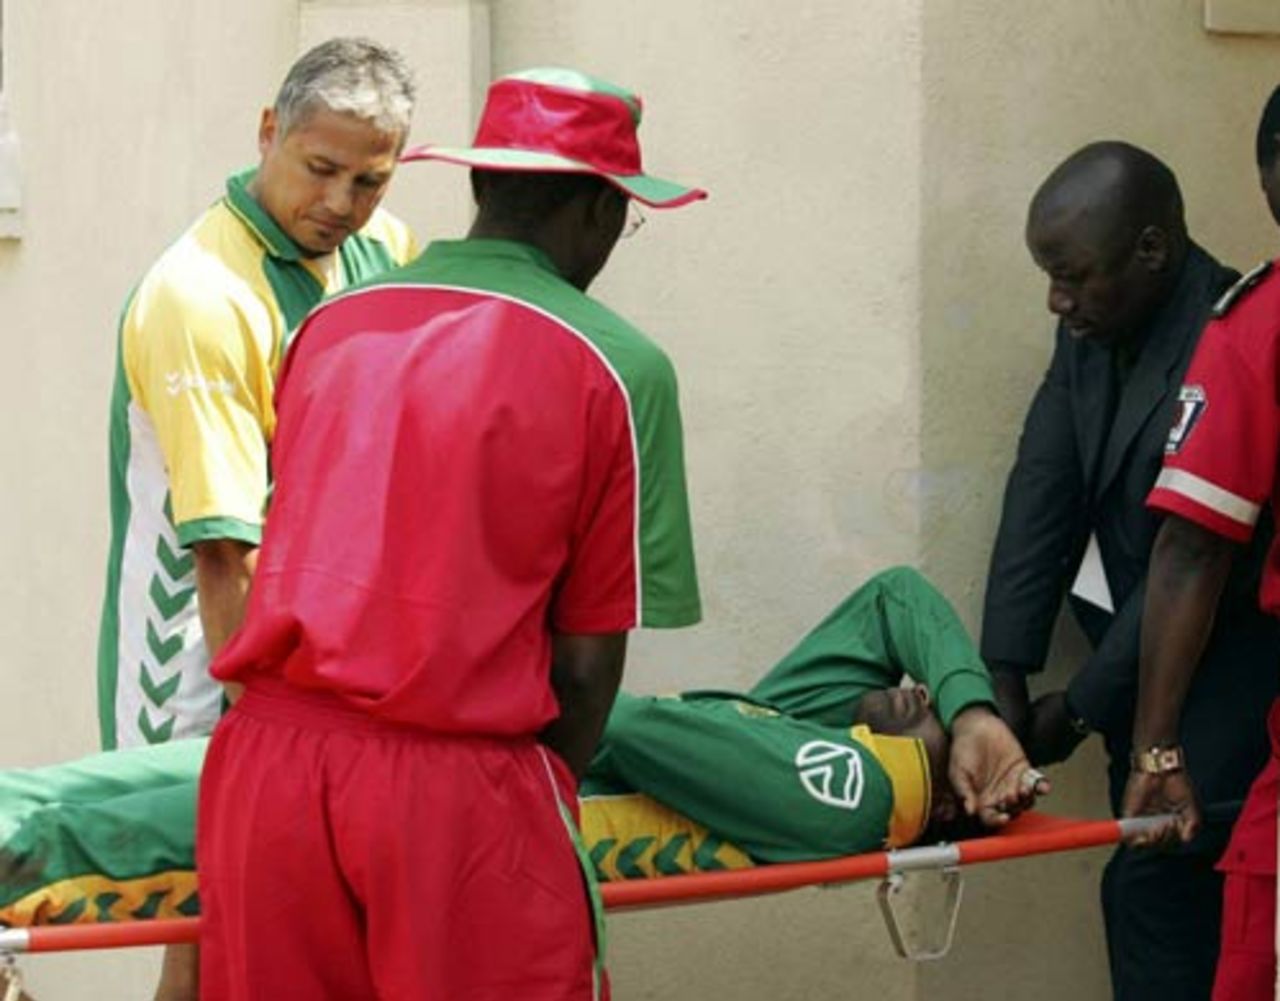 Loots Bosman is carried off after crashing into the advertising boards, Zimbabwe v South Africa, 2nd ODI, Harare, August 25, 2007